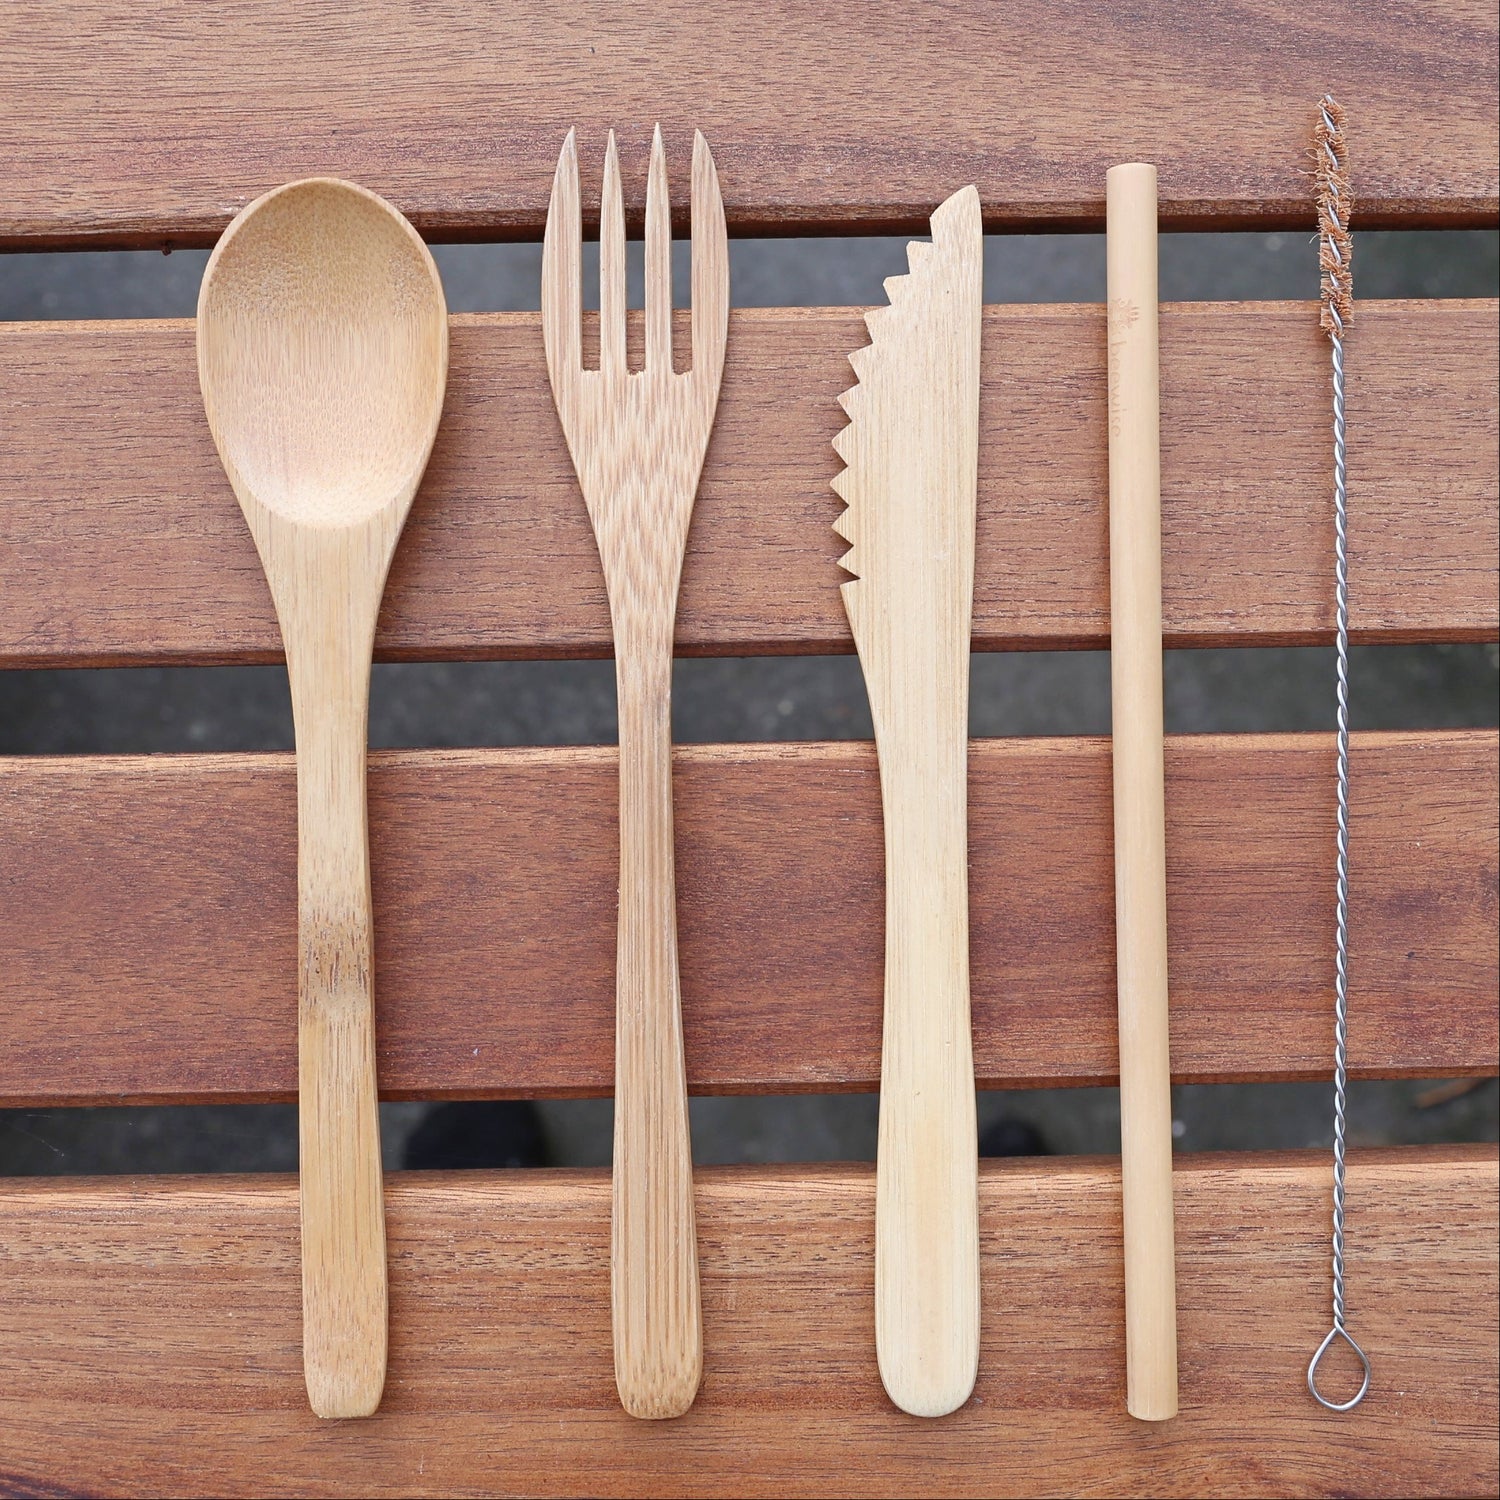 bamboo fork, spoon, knife and straw on top of a wood table